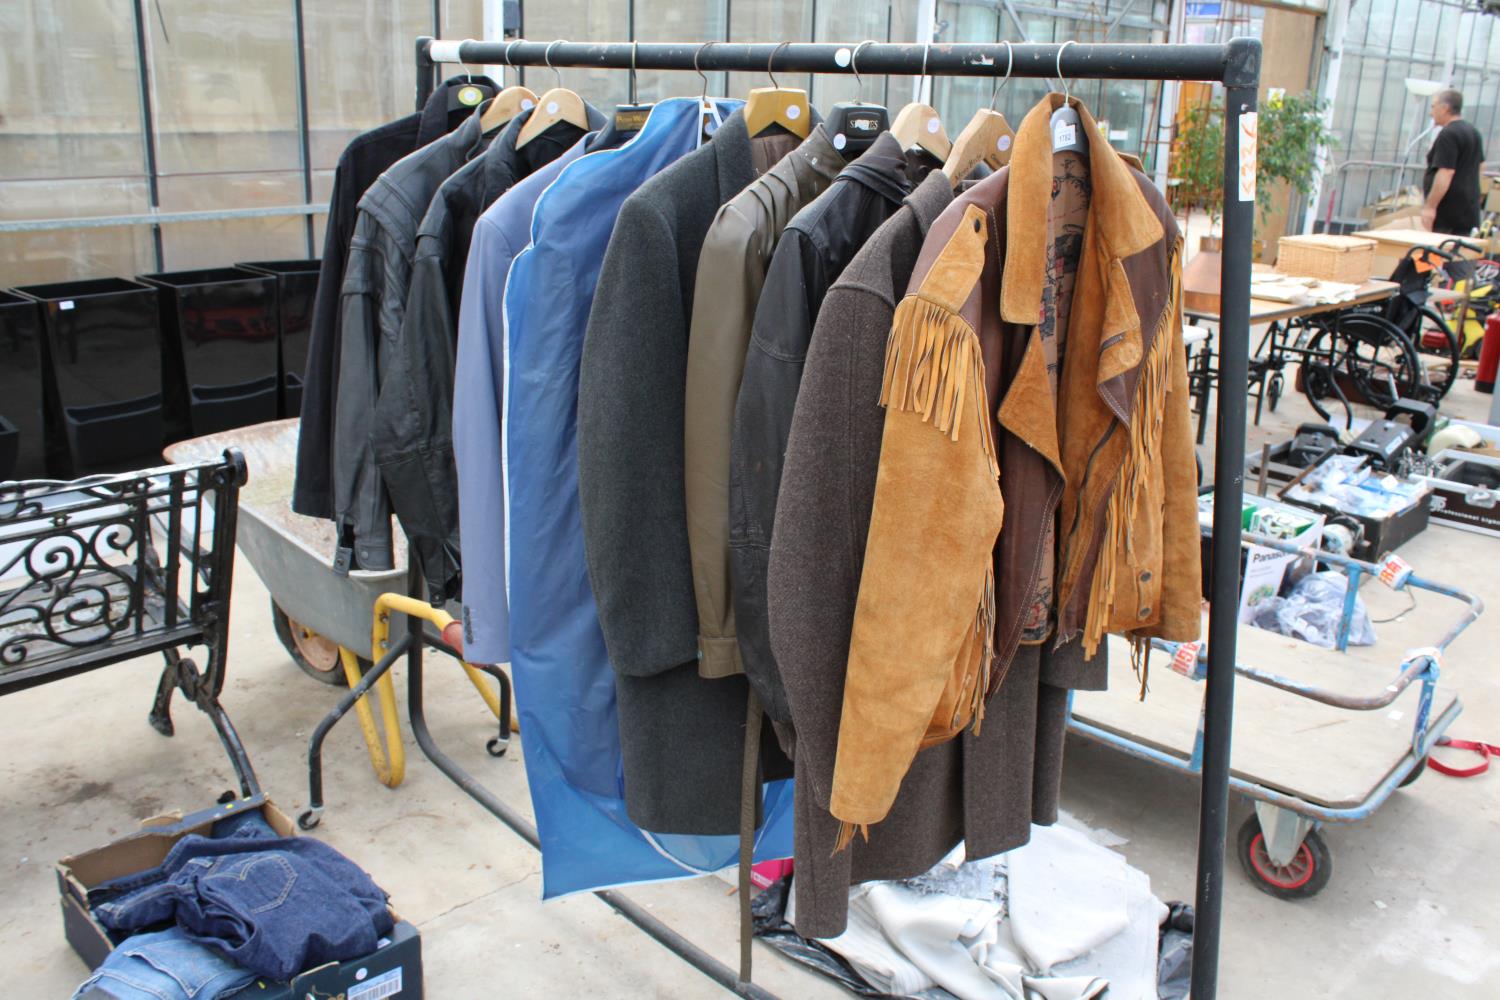 A LARGE ASSORTMENT OF MENS JACKETS TO INCLUDE LEATHER JACKETS AND OVERCOATS ETC